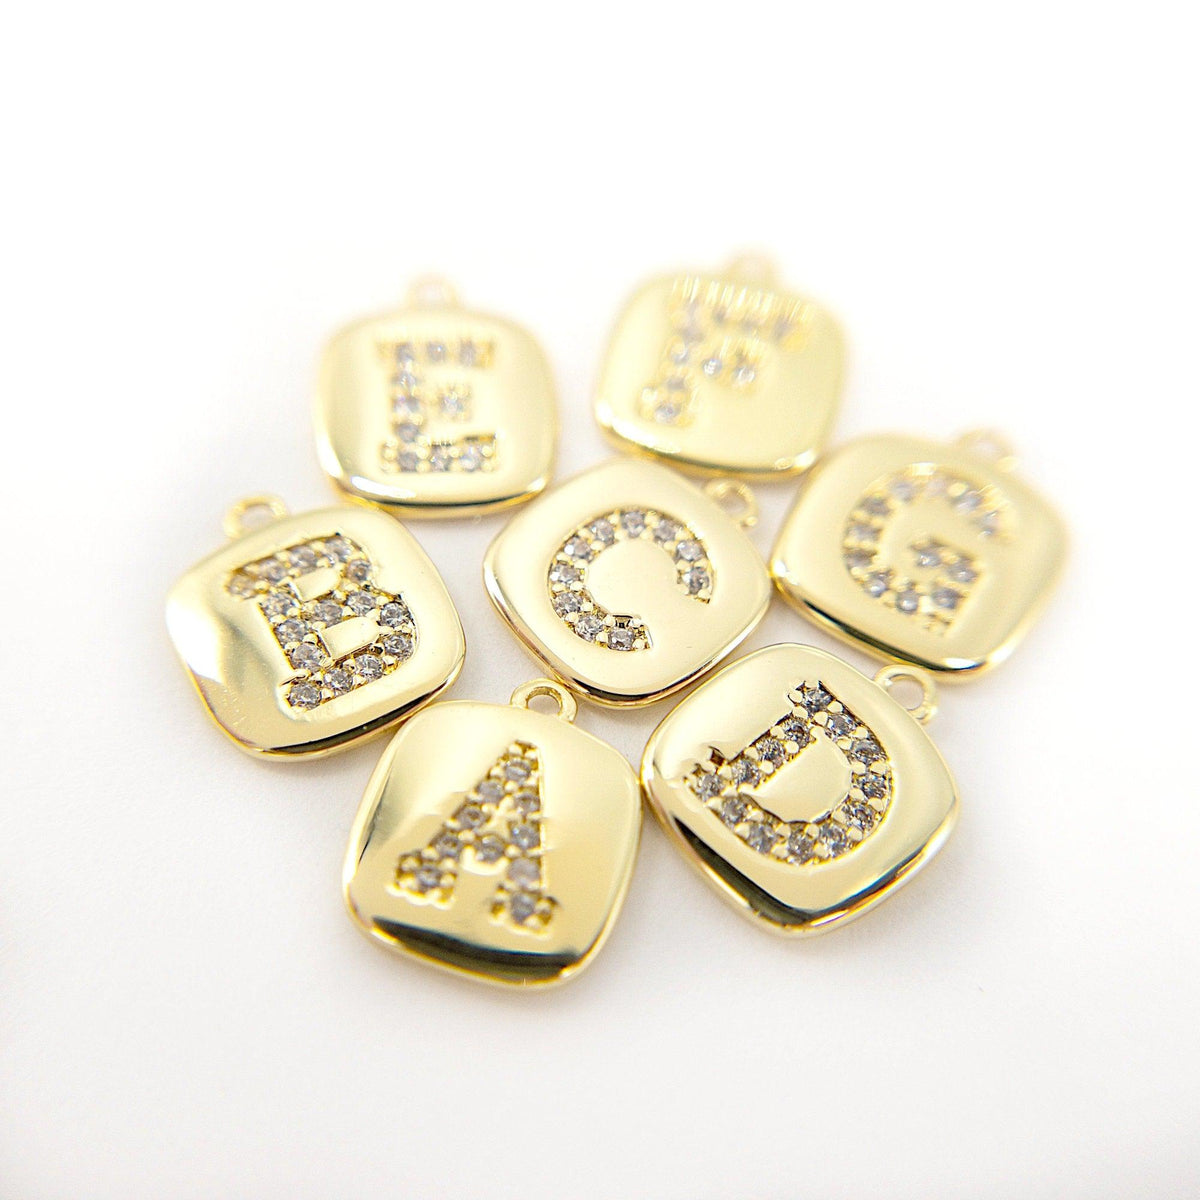 Small Gold Alphabet Letter Charms with CZ Rhinestones (8-9mm)